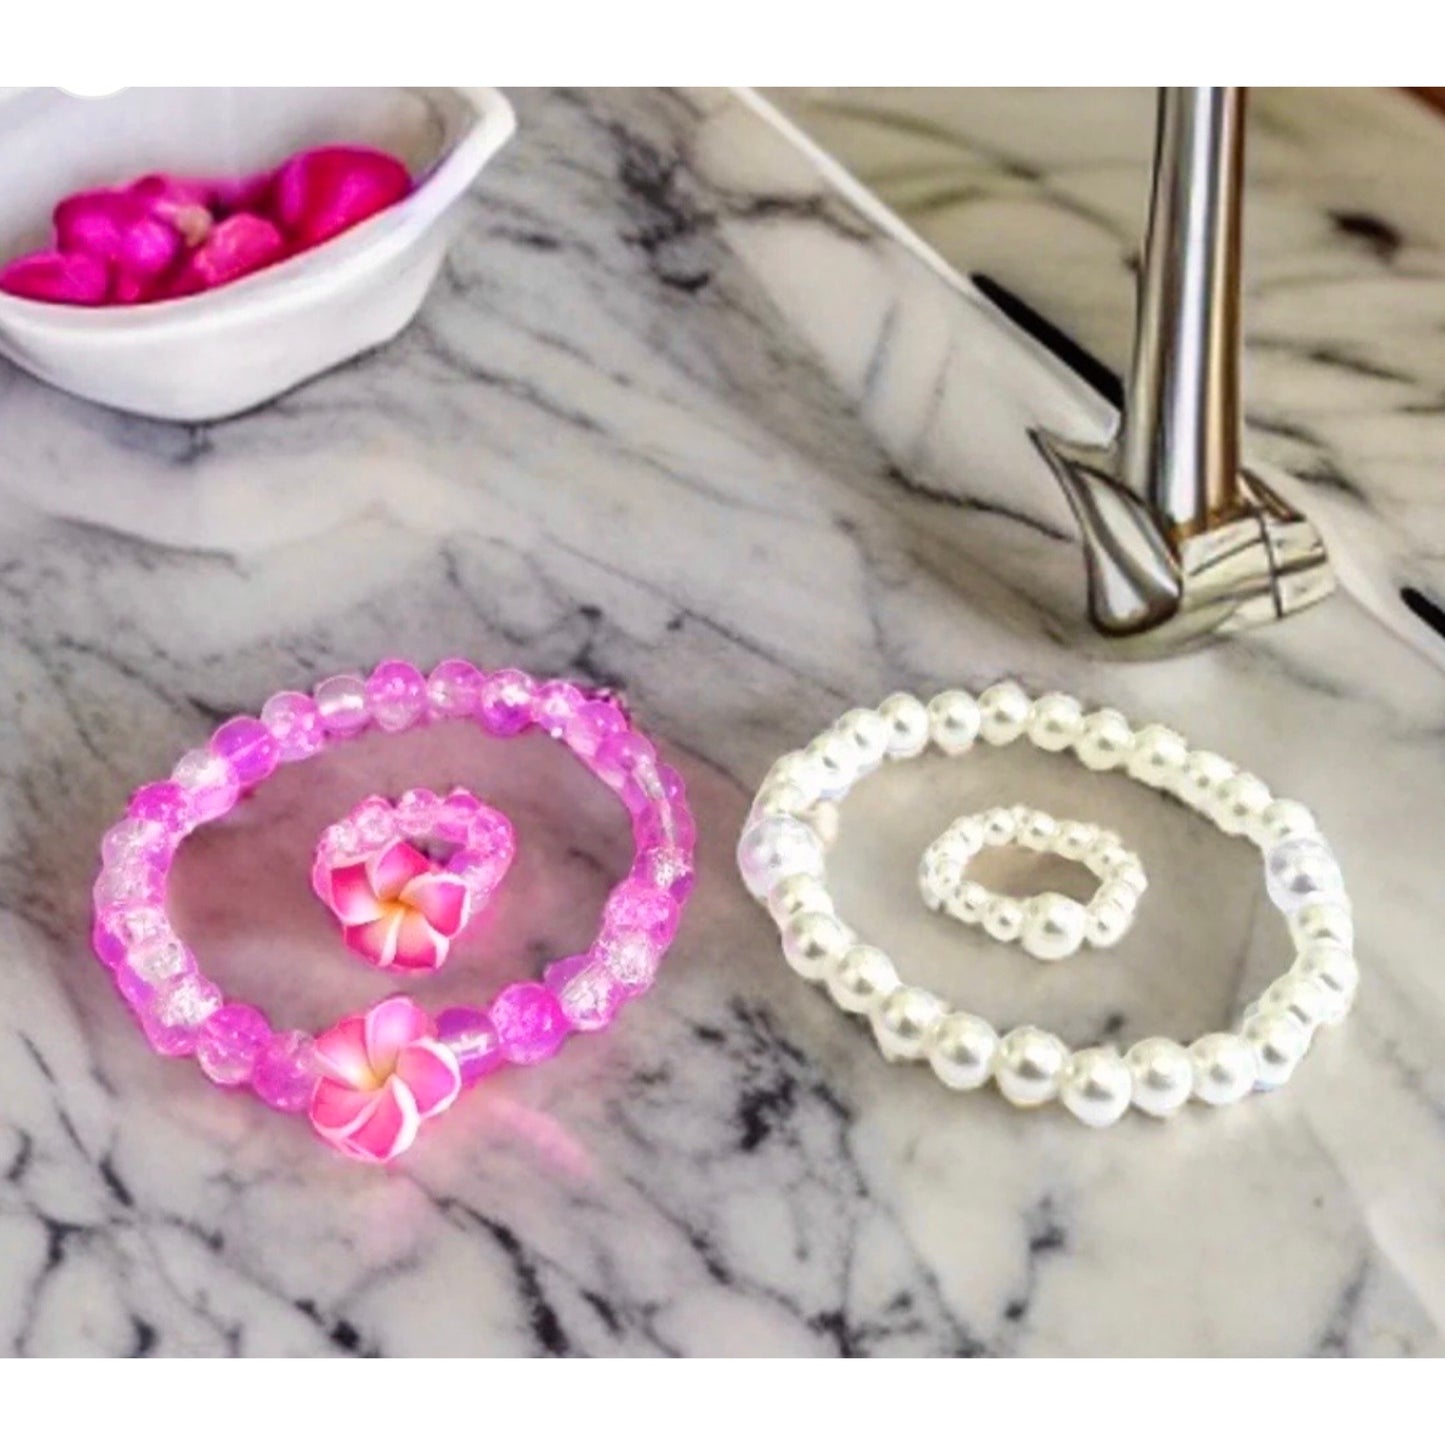 4 Pieces stretchable baby bracelets and ring sets